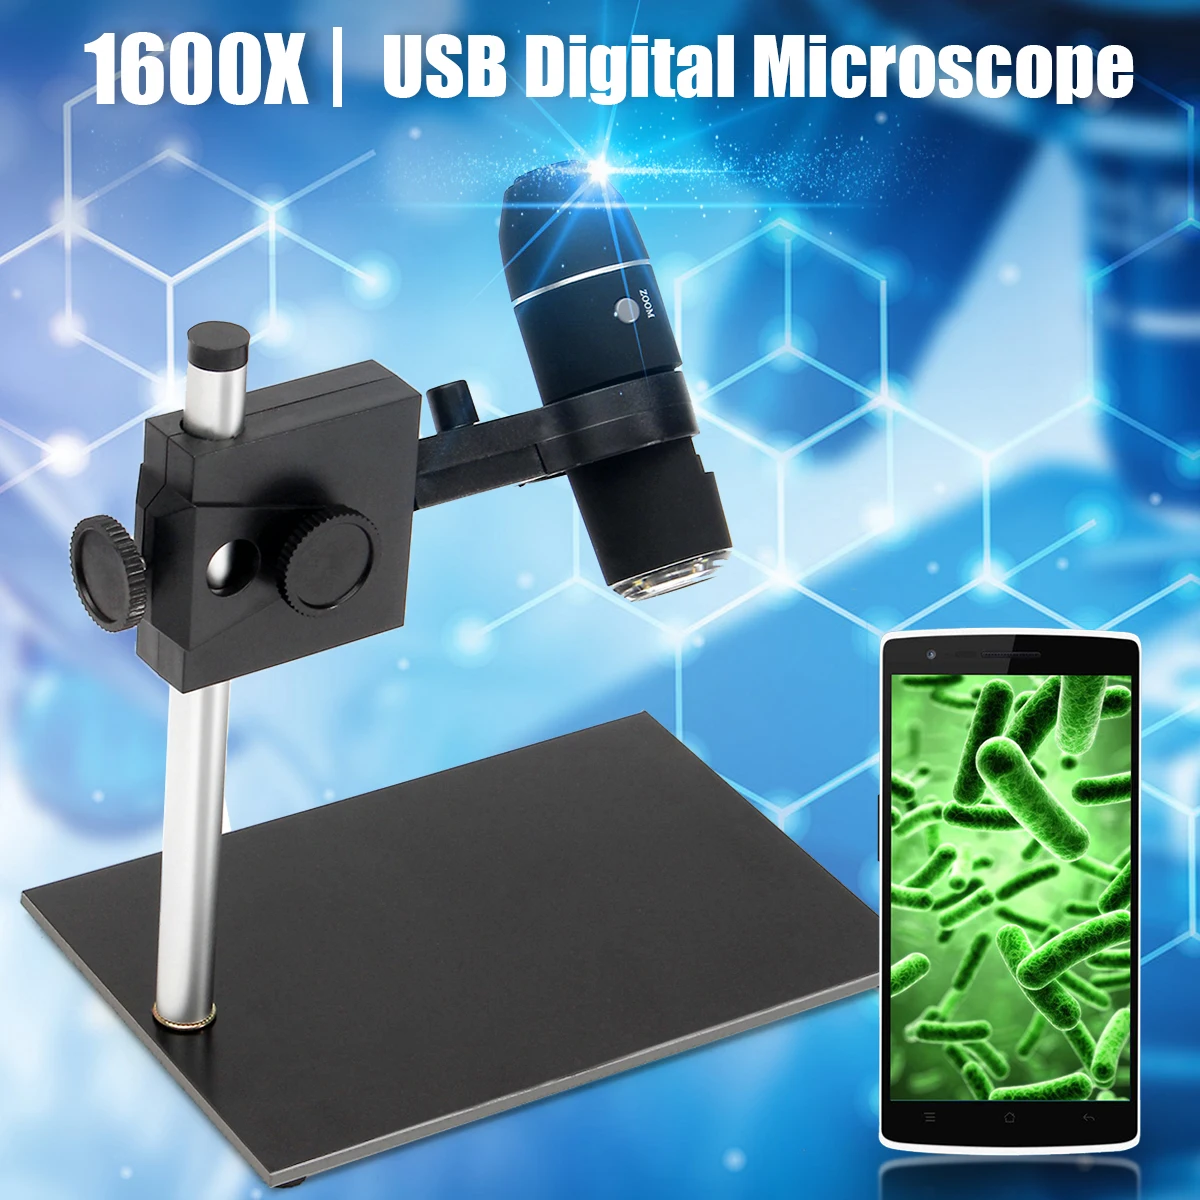 

8 LED 1600X USB Digital Microscope Magnifier Video Camera With Adjustable Stand Digital Zoom 6X Dynamic frames 30f/s Black